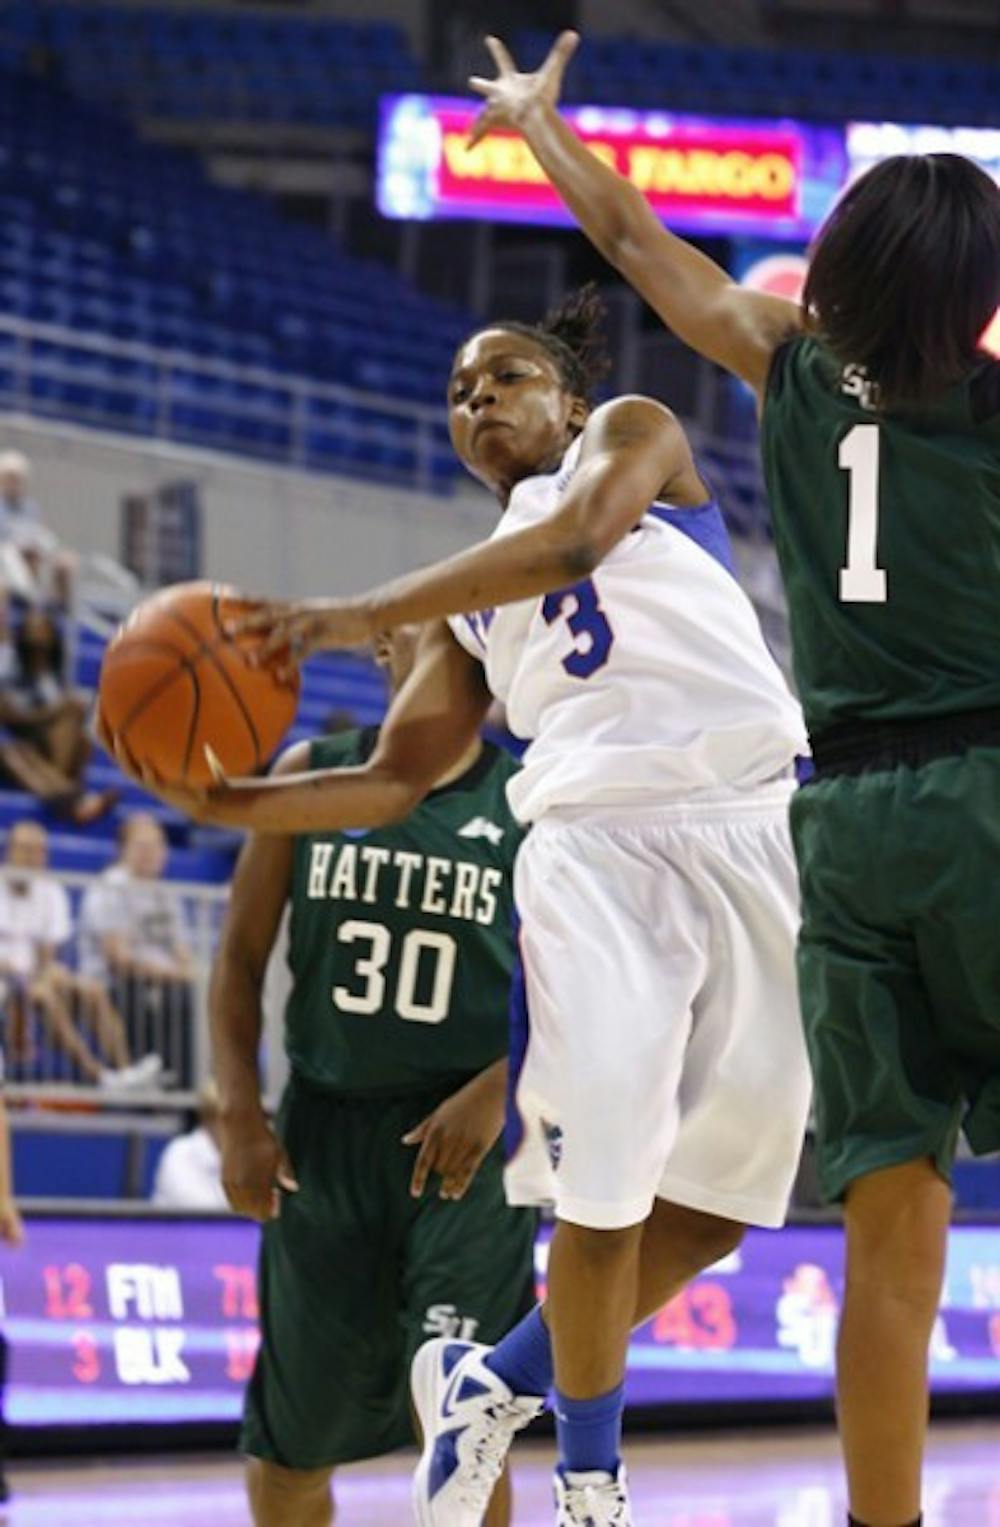 <p>Florida senior point guard Lanita Bartley scored 44 points and grabbed 16 rebounds in two Gators’ wins during the weekend.</p>